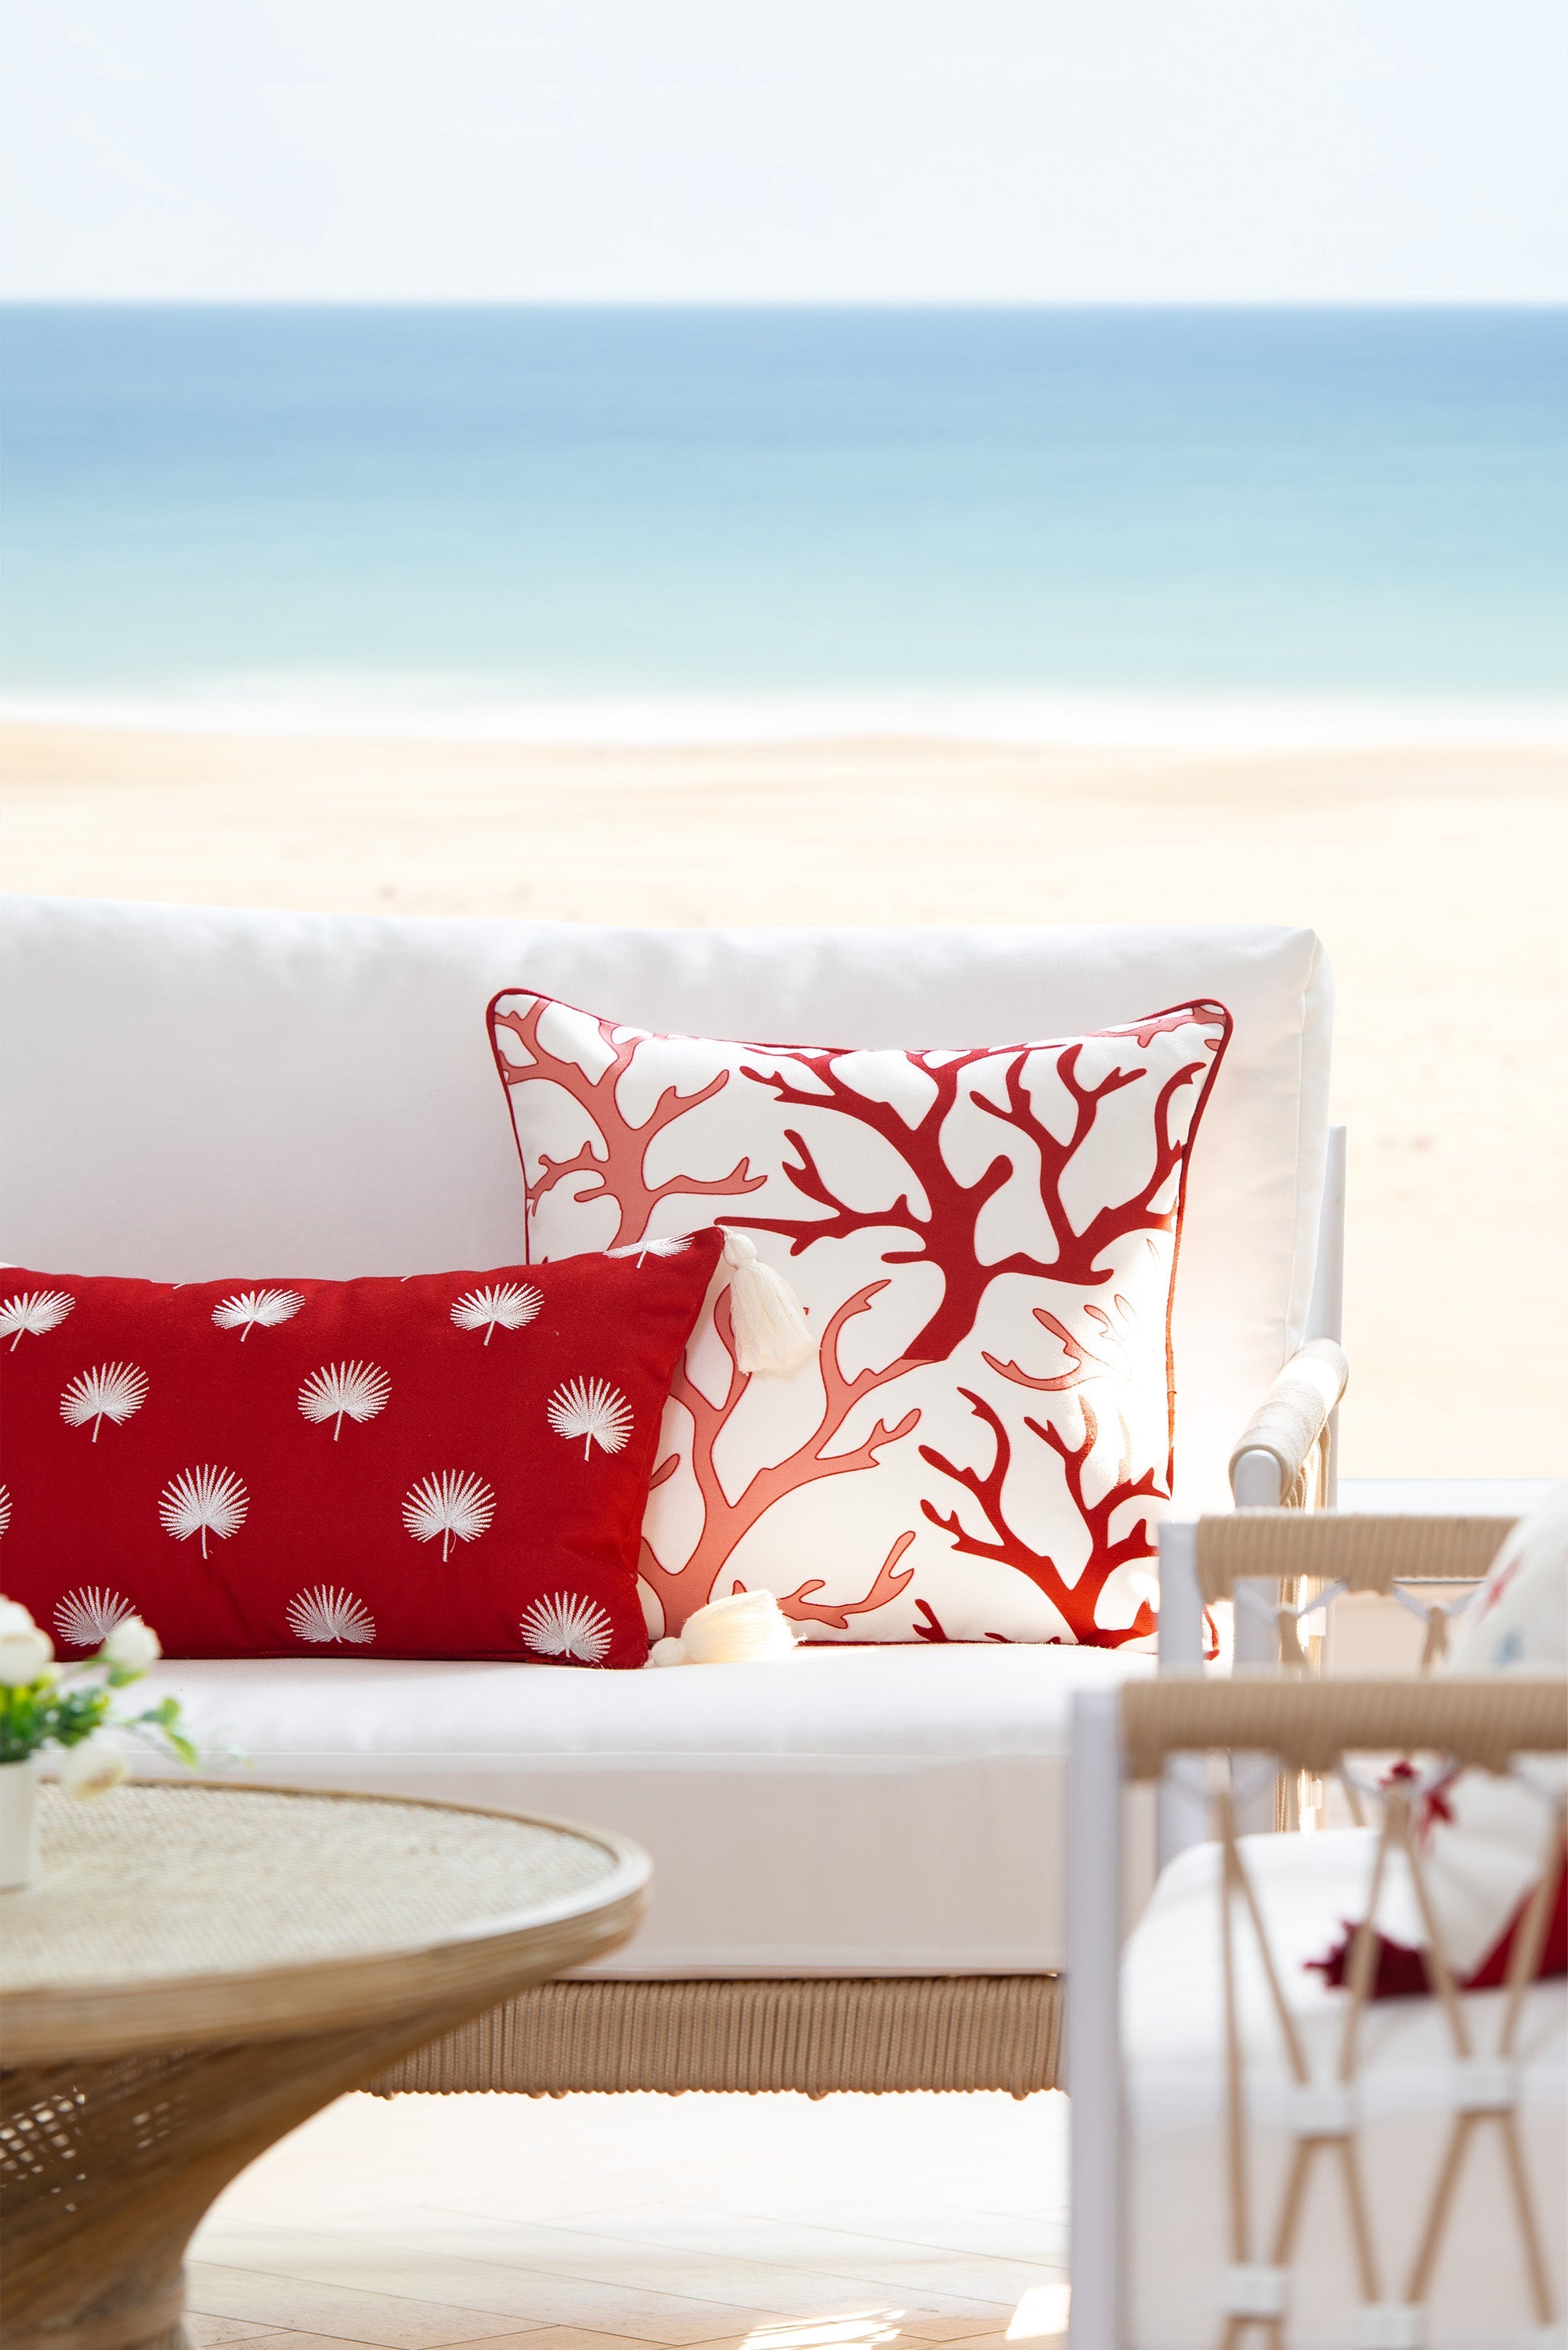 Coastal Indoor Outdoor Throw Pillow Cover, Coral, Red, 18"x18"